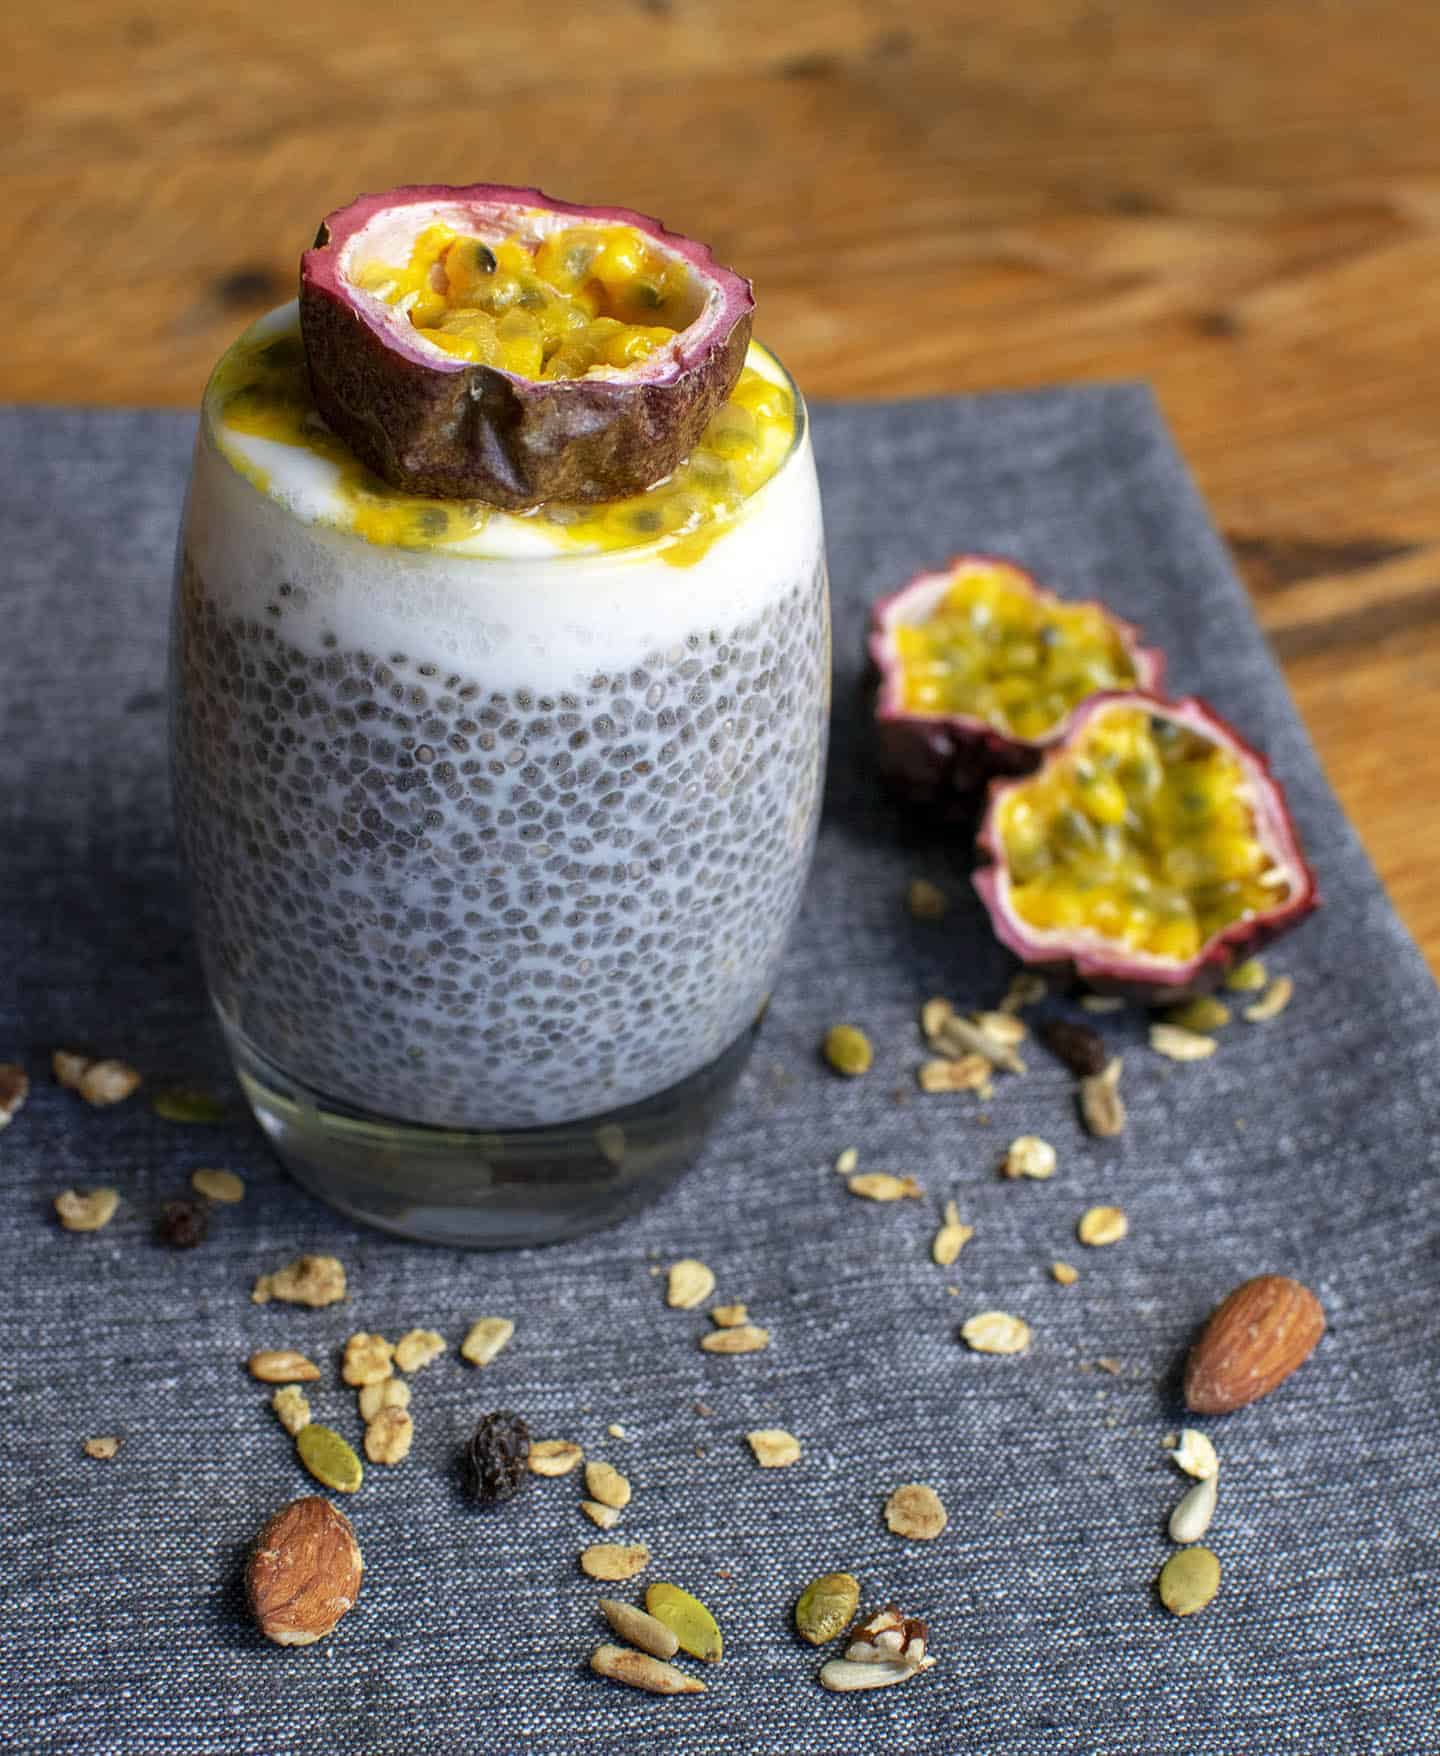 Passionfruit chia pudding set on a blue background in the second third of the portrait image. You can see the jelly-like chia seeds in the bulk of the glass with yoghurt and half a passionfruit on top. Granola is scattered around in the foreground.